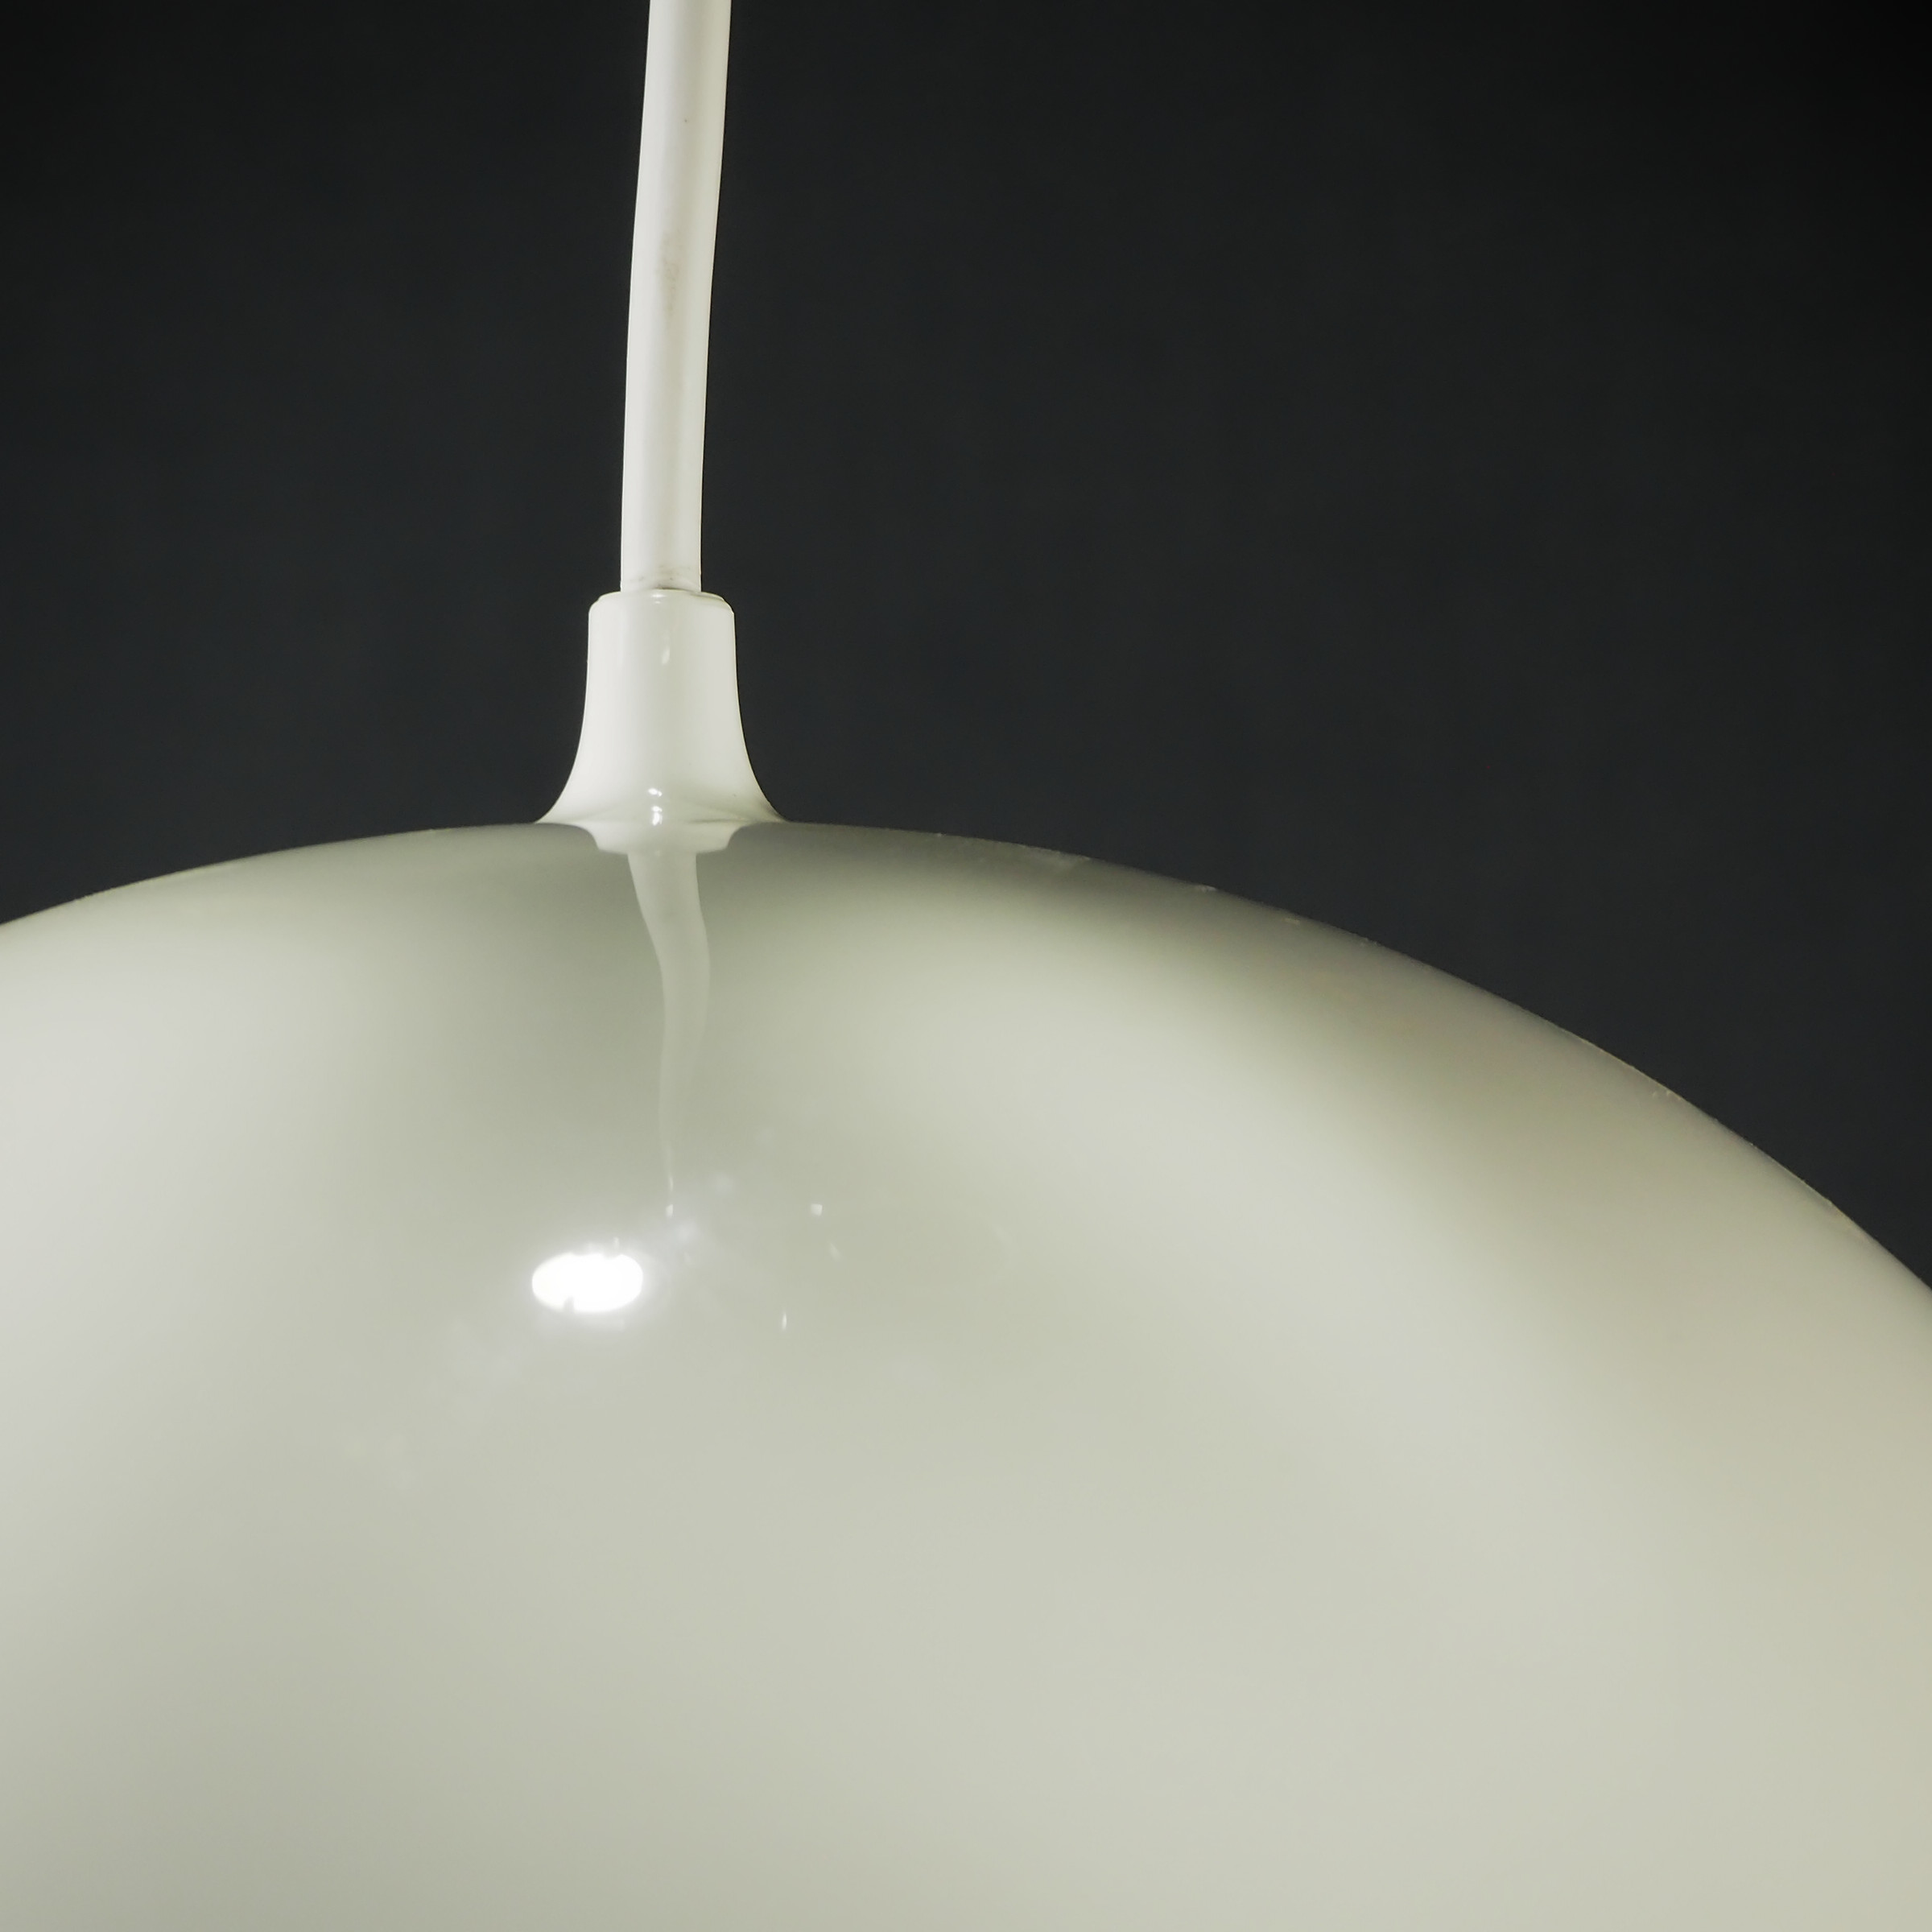 Hanging light 'Can can' by Marcel Wander for Flos - White